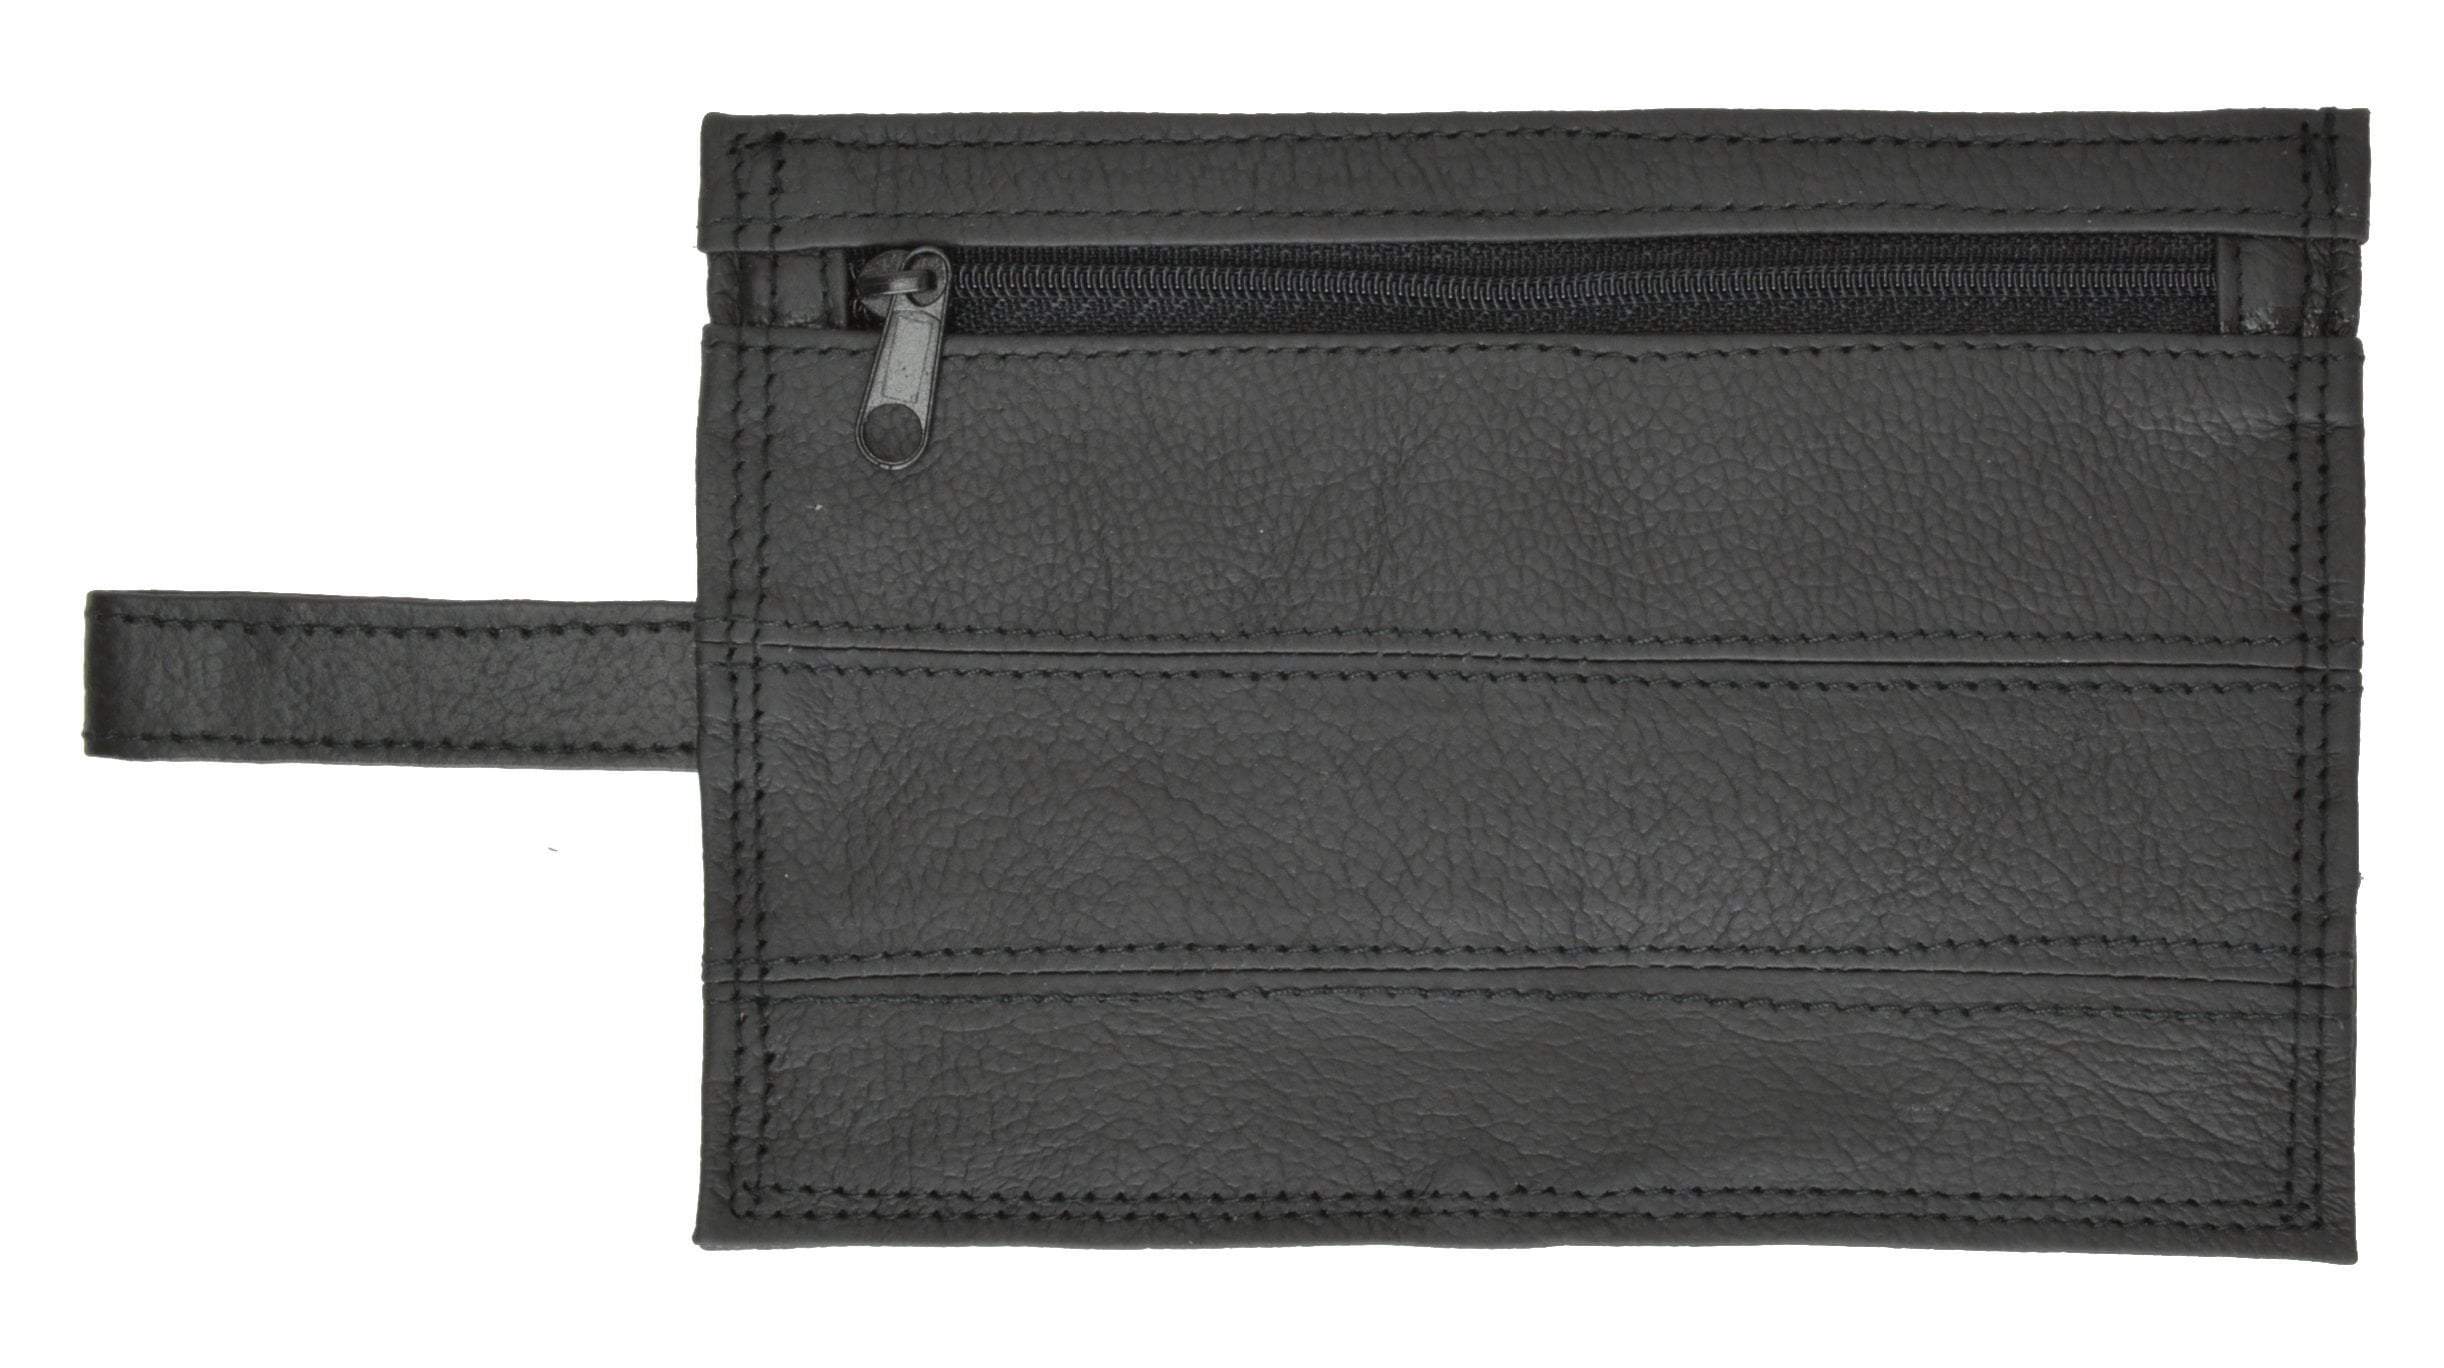 Genuine Leather Travel Money Pouch with Belt Loop #516